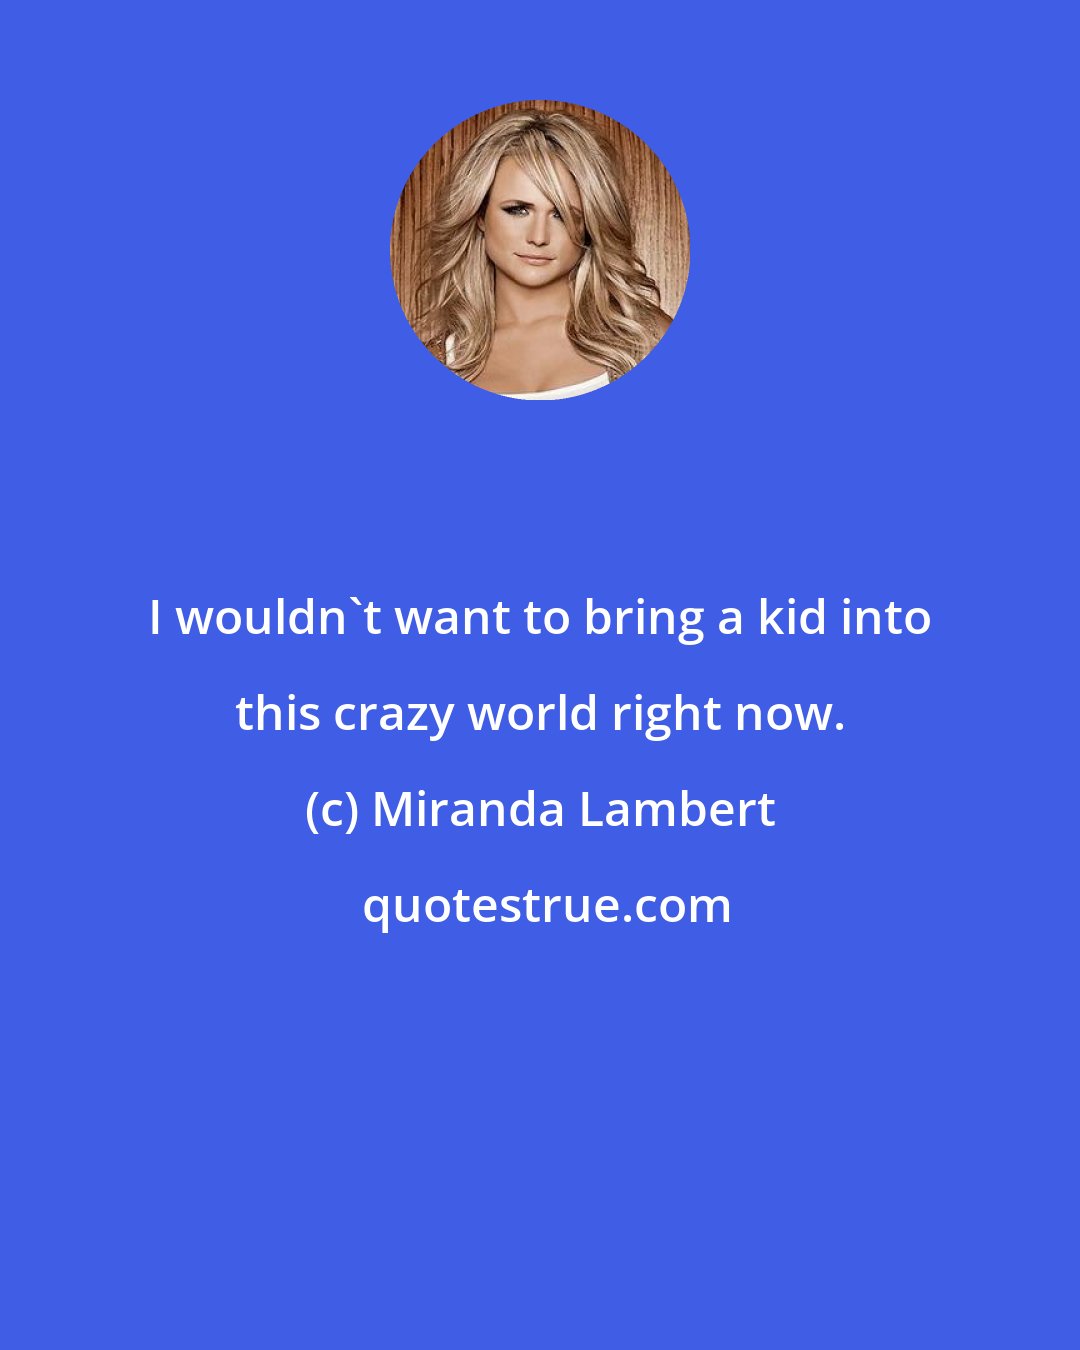 Miranda Lambert: I wouldn't want to bring a kid into this crazy world right now.